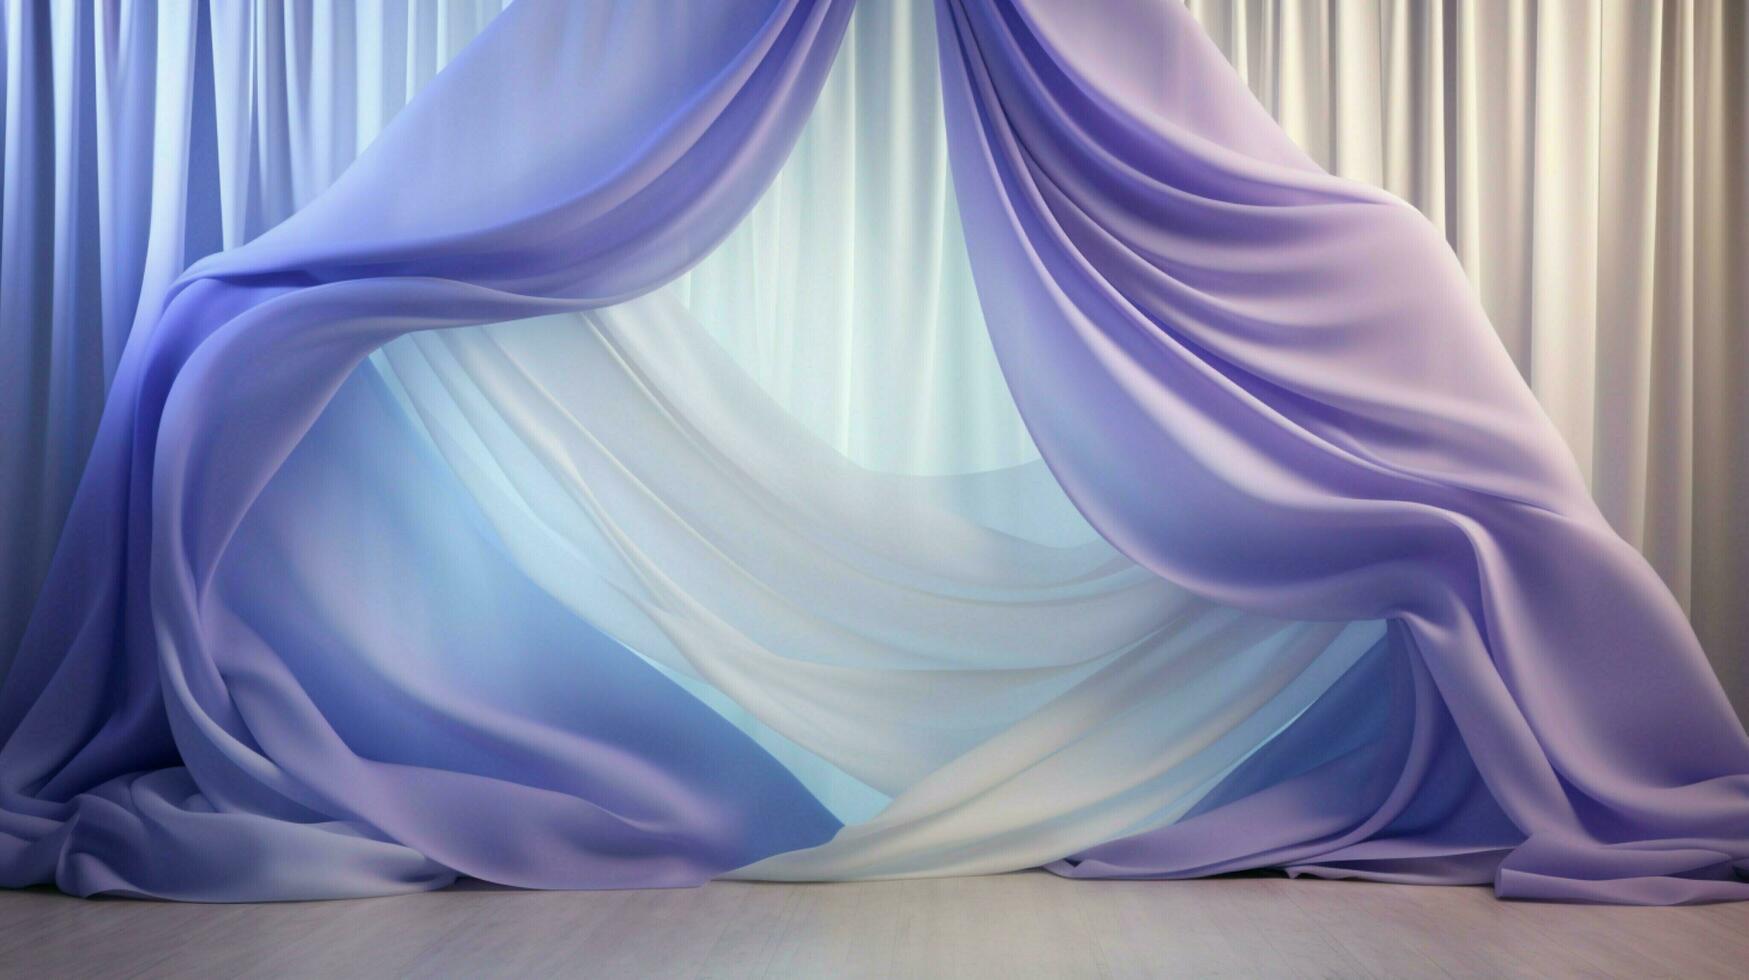 smooth satin waves create abstract elegance backdrop photo